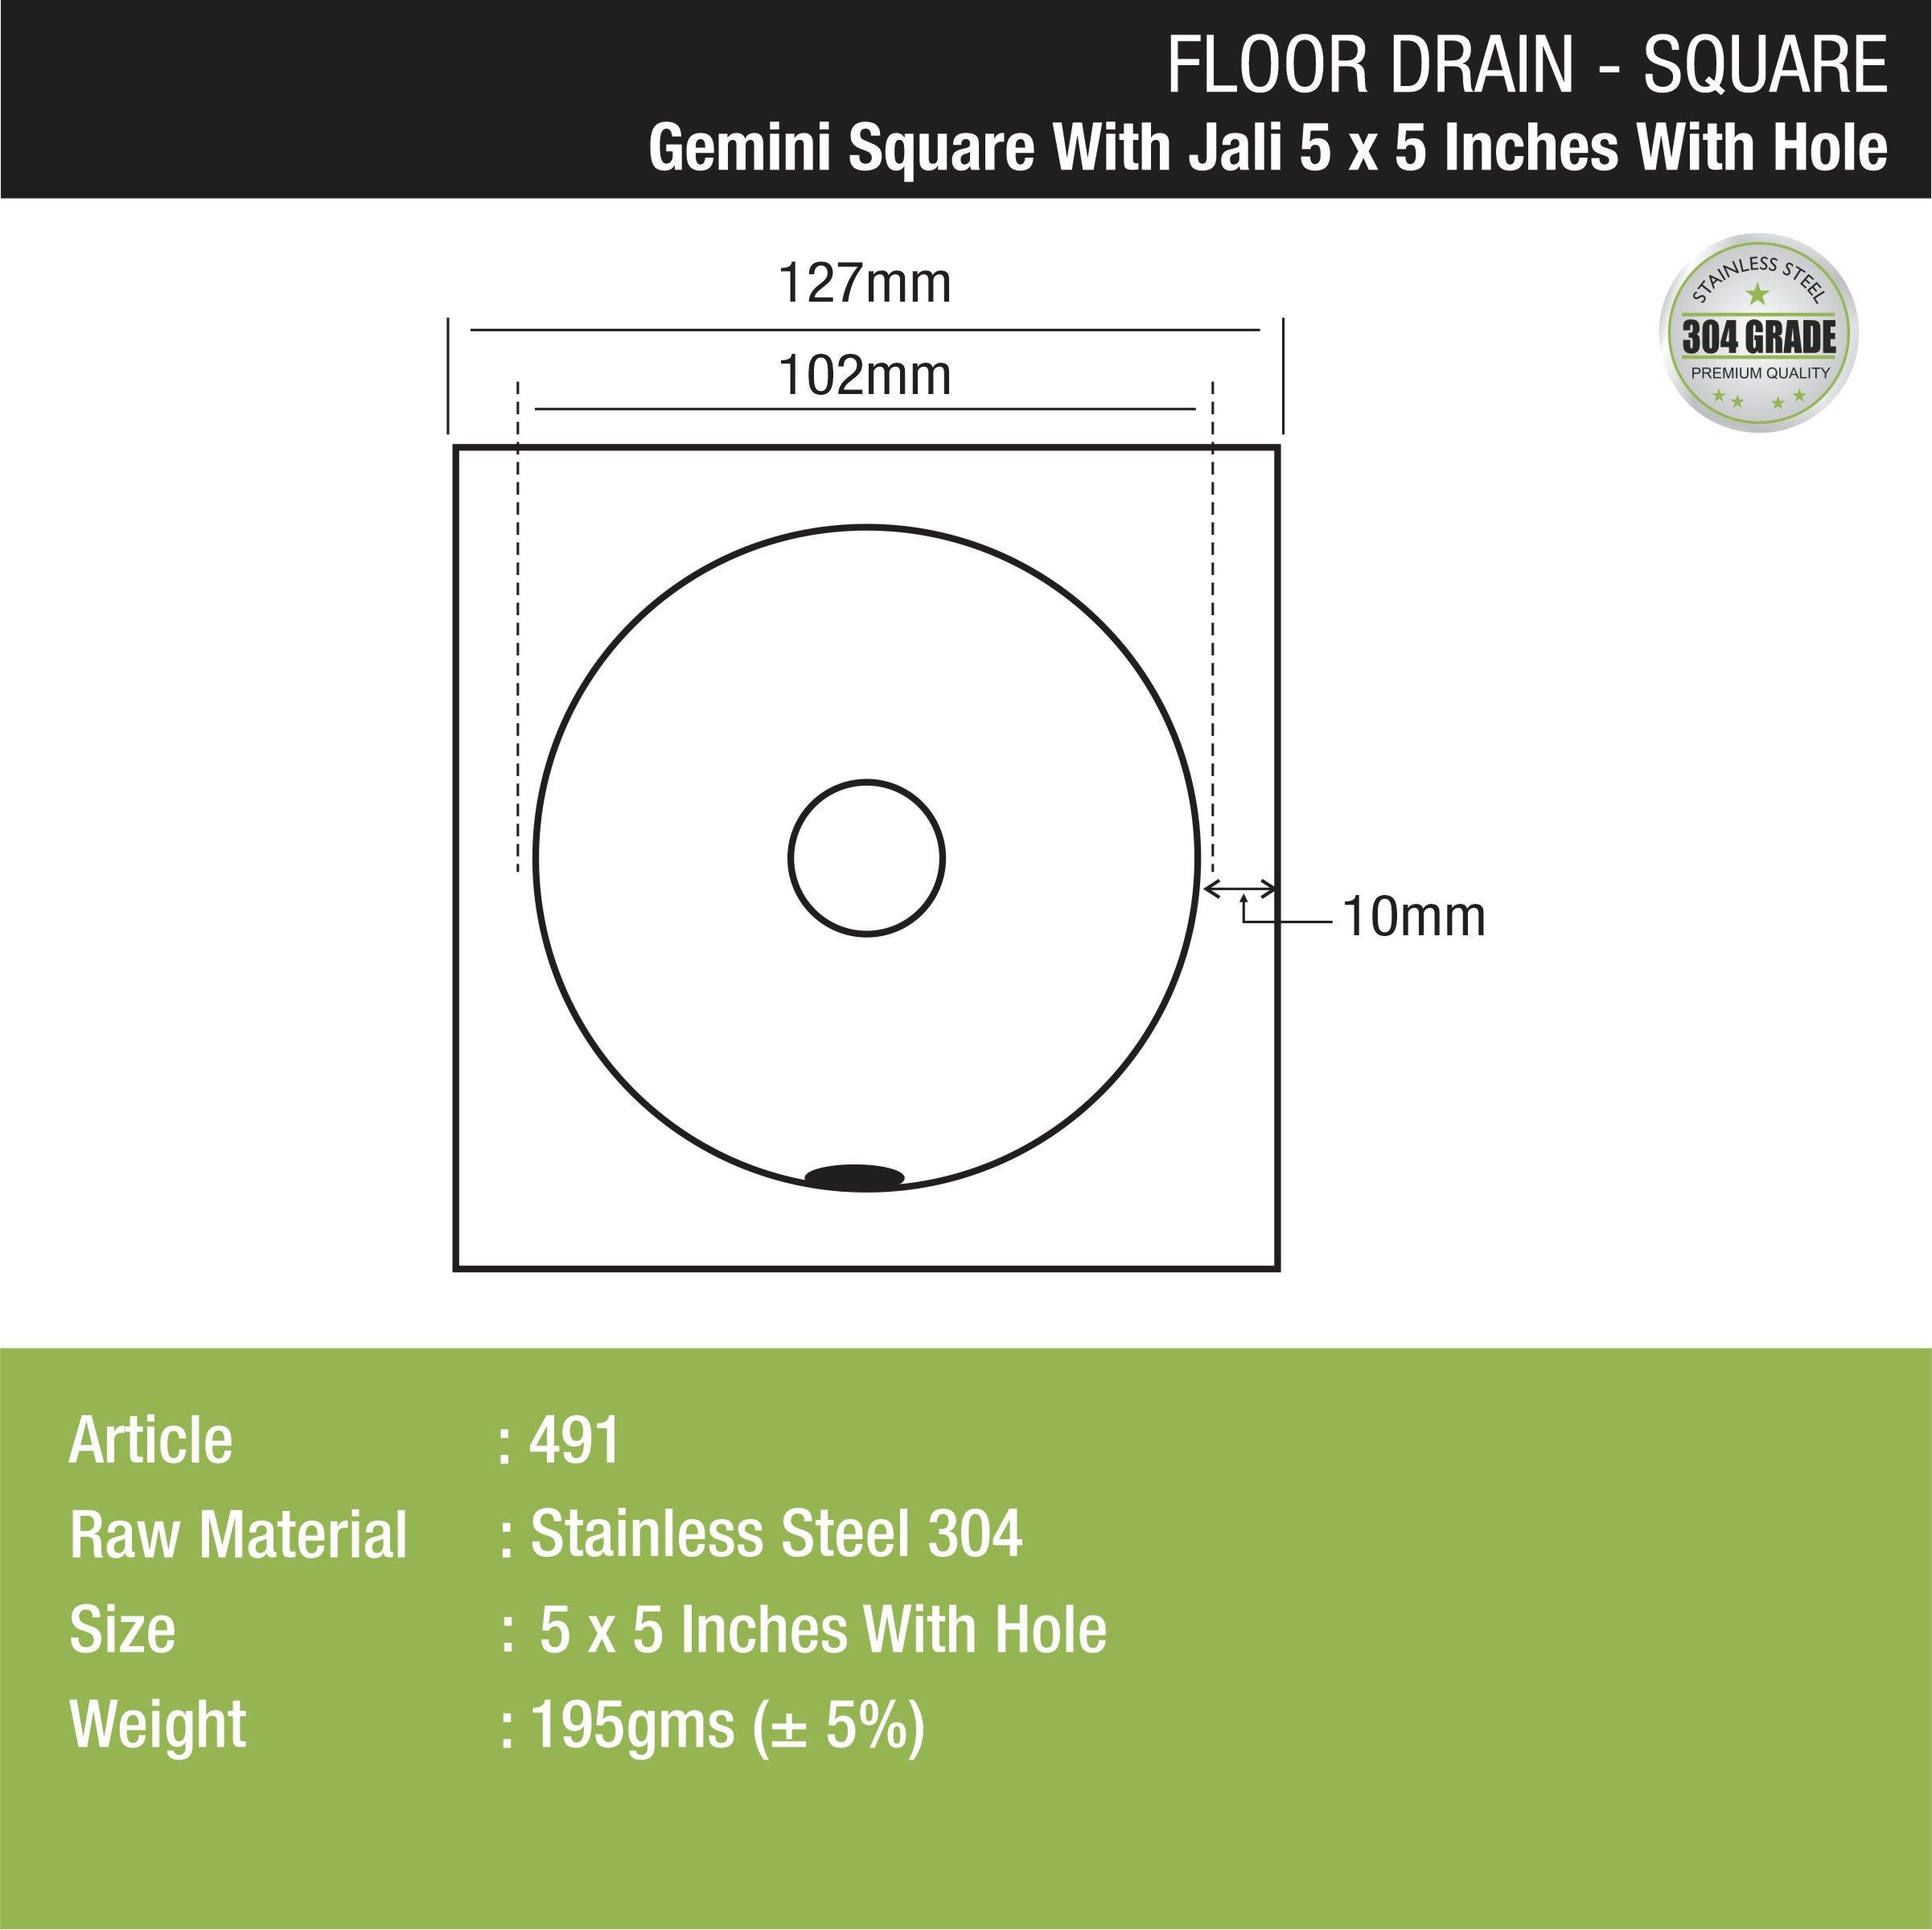 Gemini Square Floor Drain with Jali and Hole (5 x 5 Inches) with Hole dimensions and sizes